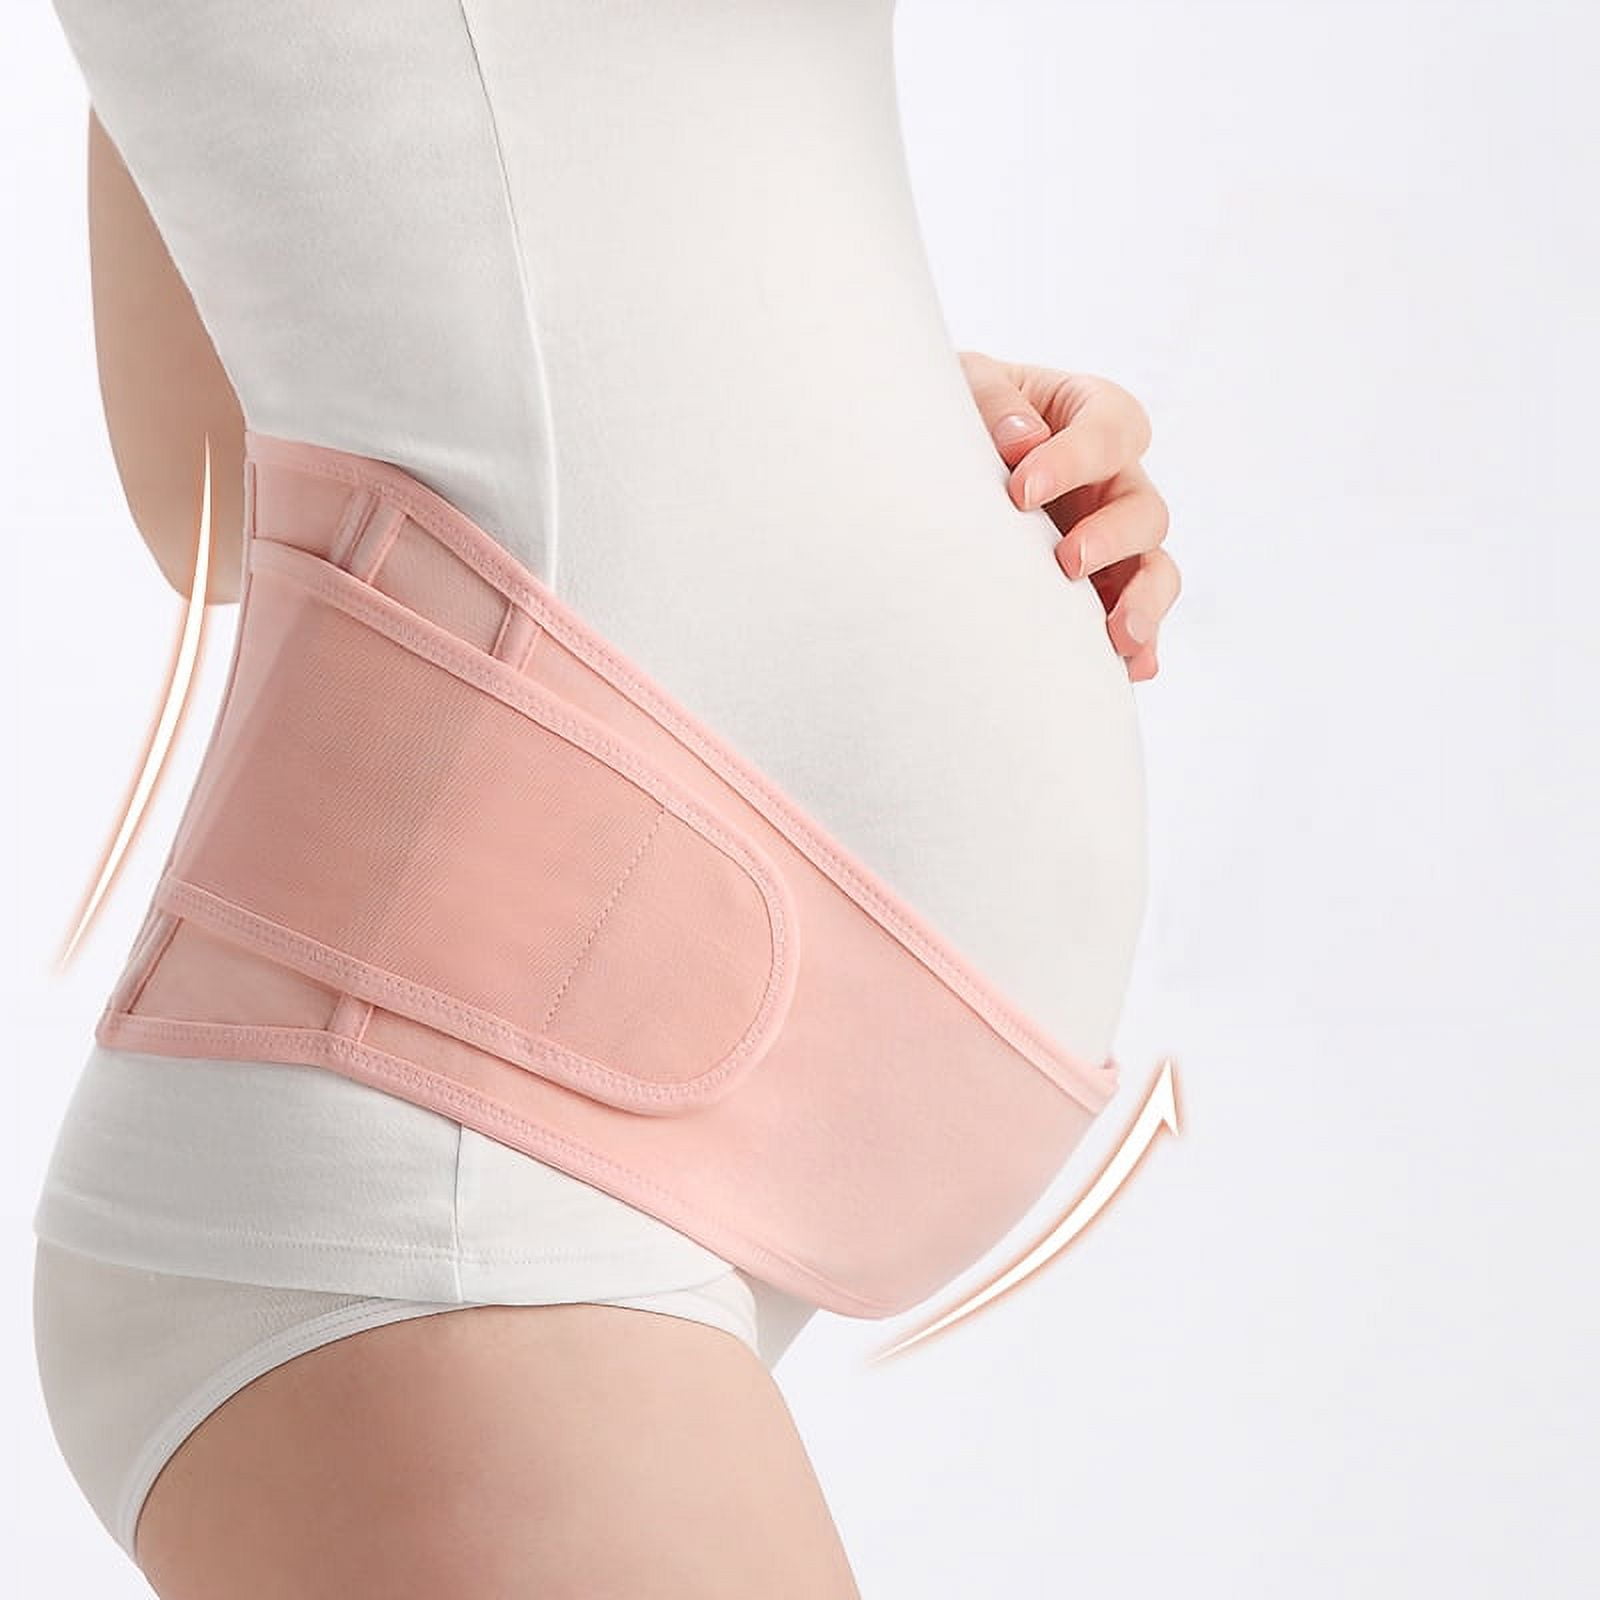 TMISHION Maternity Support Belt - Pregnancy Women Belly Band Back